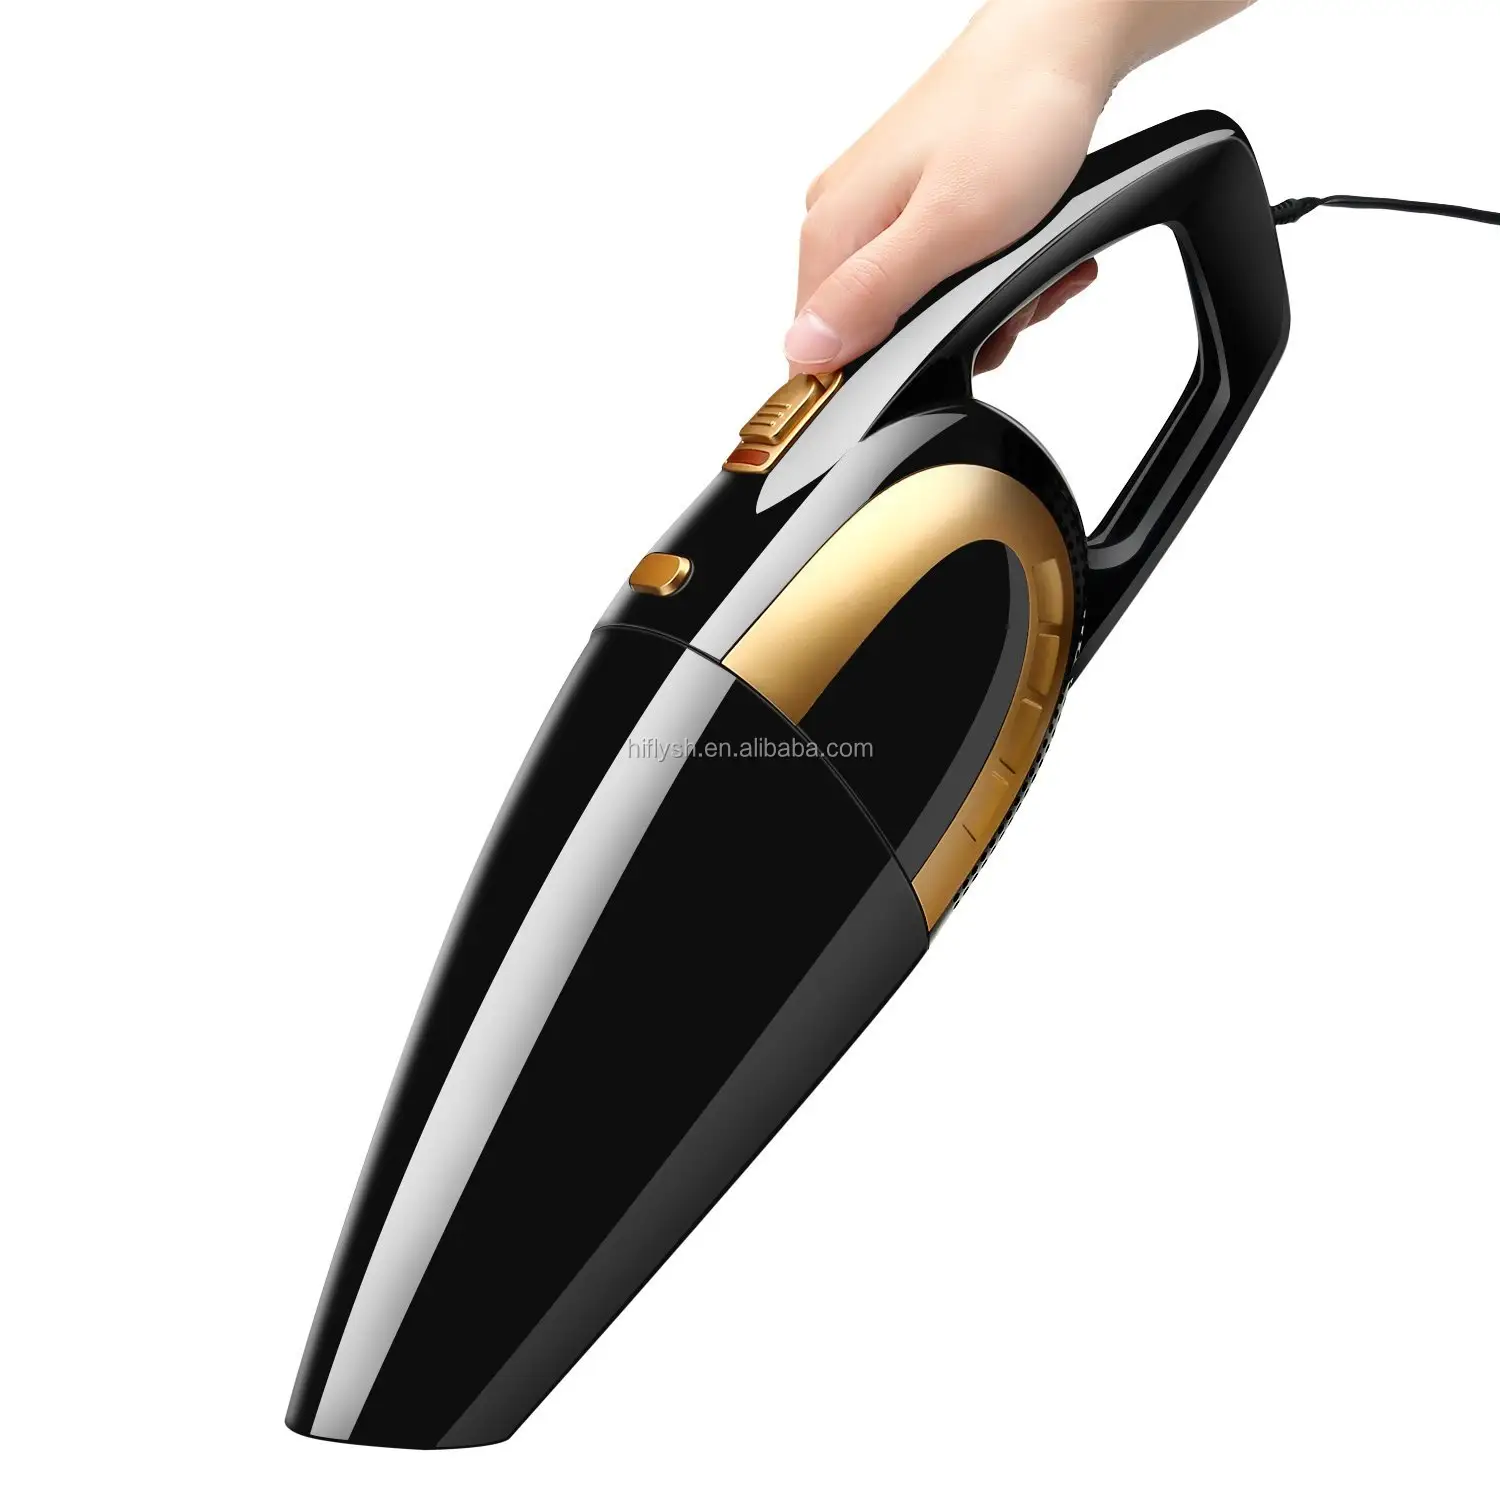 Amazon Hot Sale 2021 High Suction Portable Wet & Dry Dust Sweeper Handheld 120W 12V Car Vacuum Cleaner